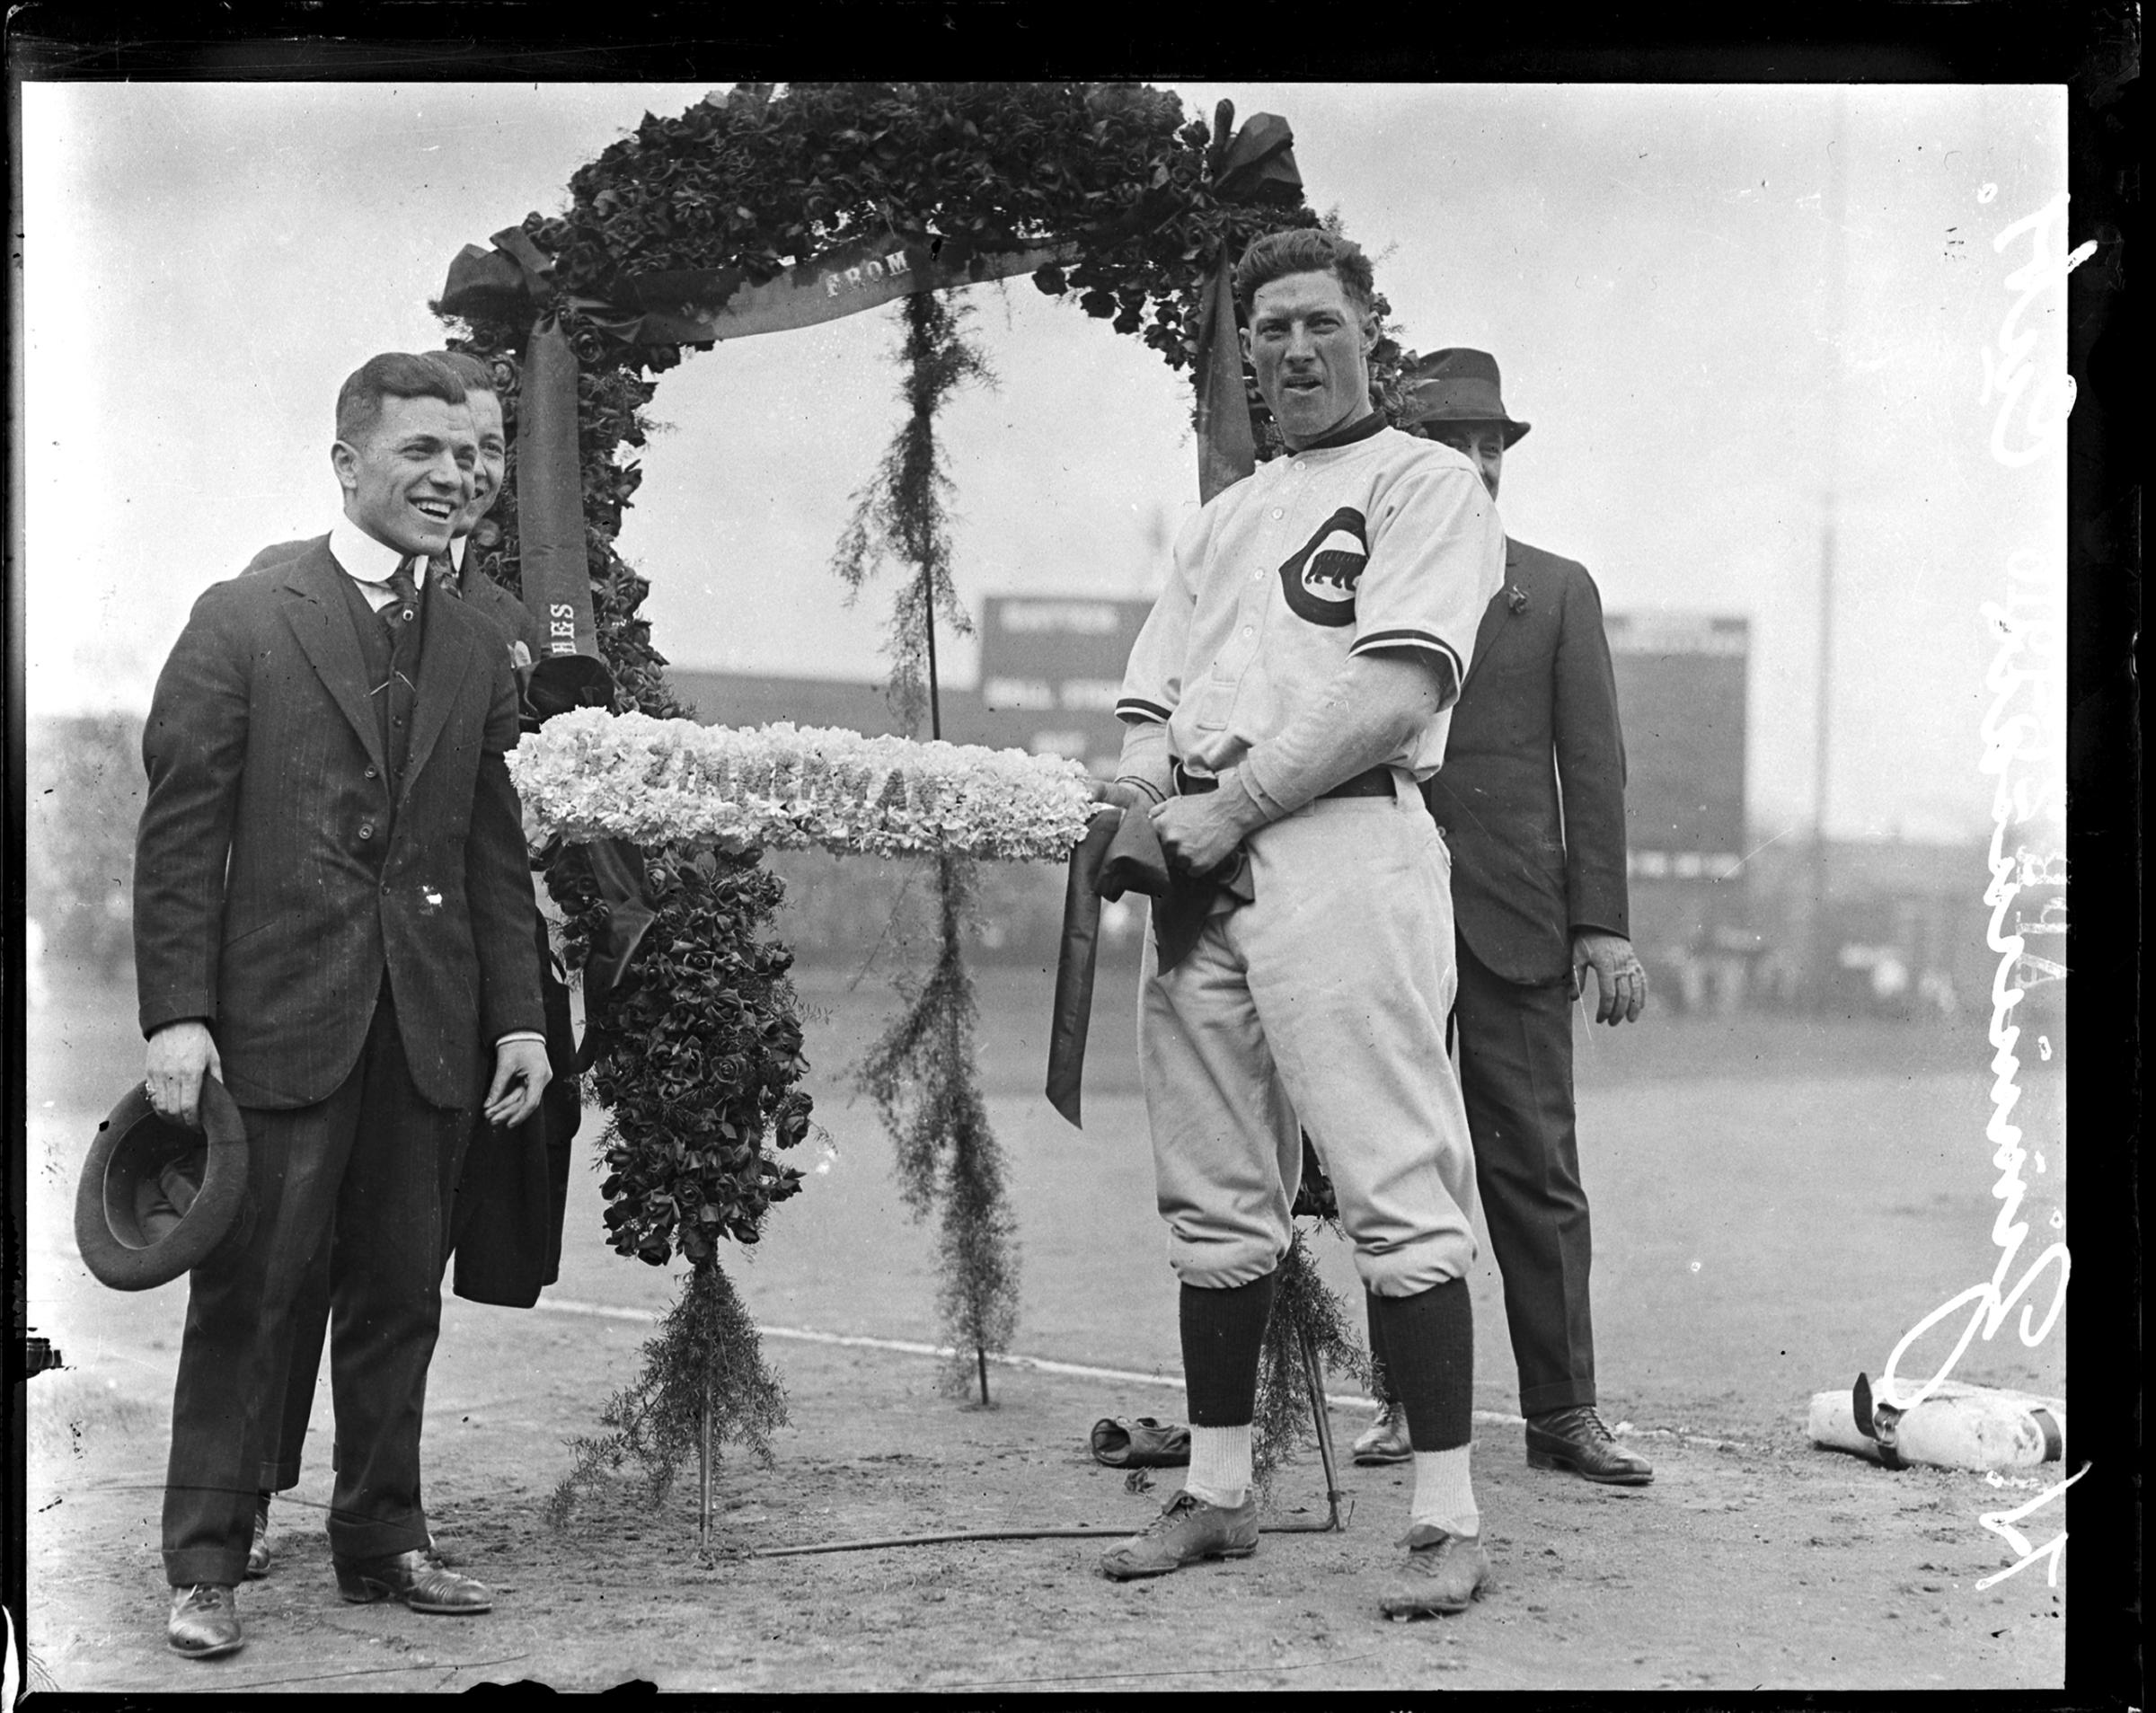 National League's Chicago Cubs baseball player Heinie Zimmerman standing in front of a floral arch at Weeghman Park, Chicago, Illinois, 1916.